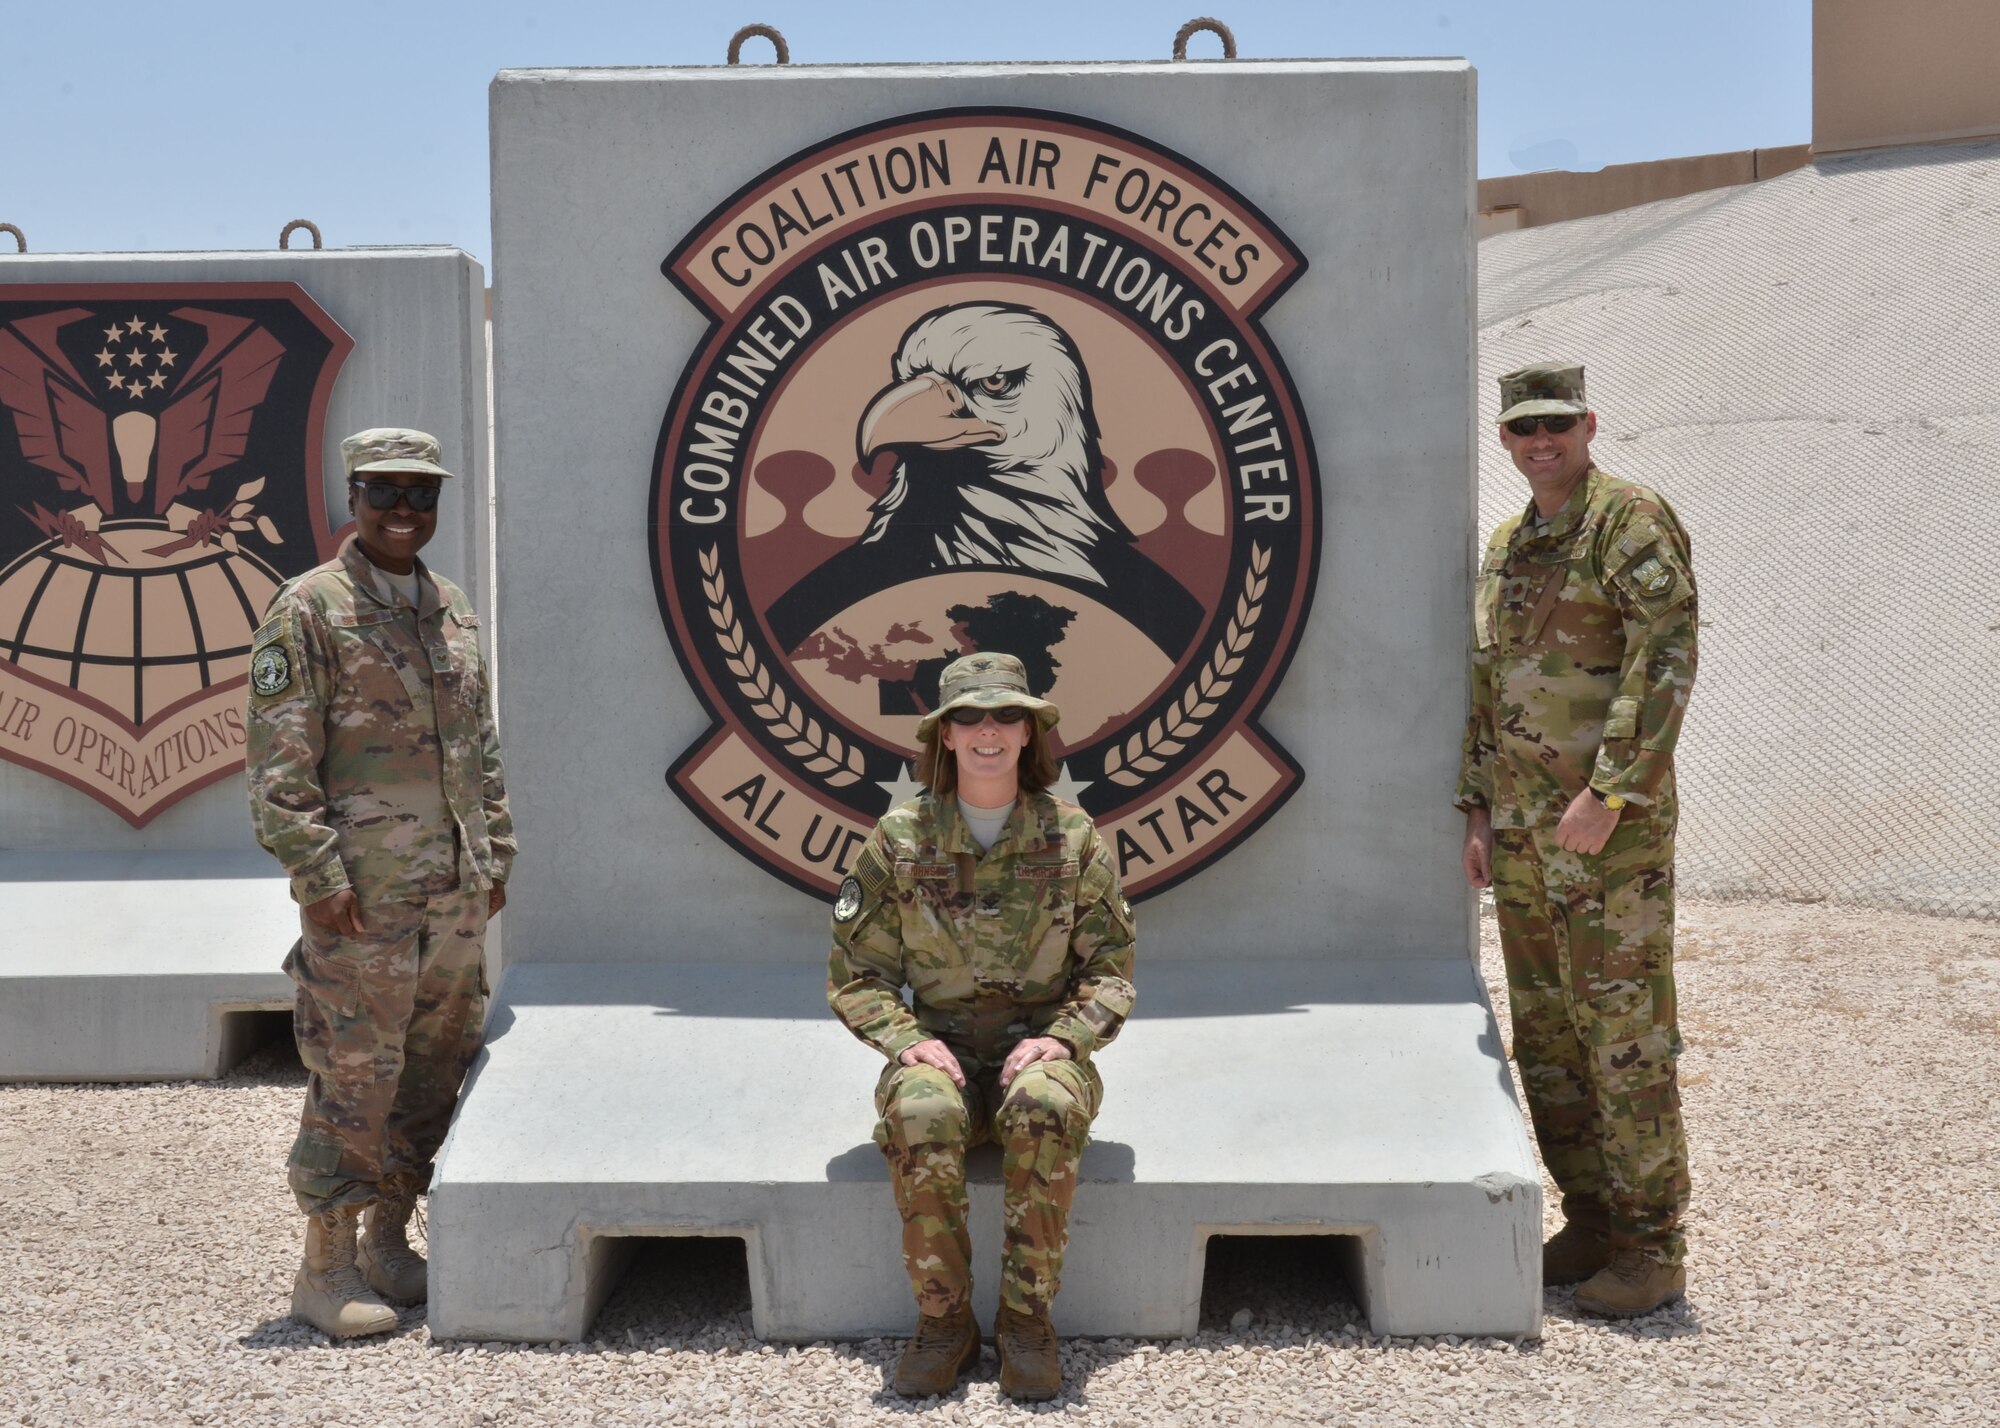 Col. Jennie R. Johnson, 403rd Wing commander, served as the Director of Mobility Forces in the Combined Air perations Center at Al Udeid Air Base, Qatar, in 2018. She served in the CAOC with Tech. Sgt. Sabine Severe, left, a member of the 403rd Force Support Squadron, and Maj. Kelly Soich, right, 403rd Aircraft Maintenance Squadron commander. She took command in May 2017. The 403rd Wing Change of Command is June 9 at 1 p.m. at the Fuel Cell.